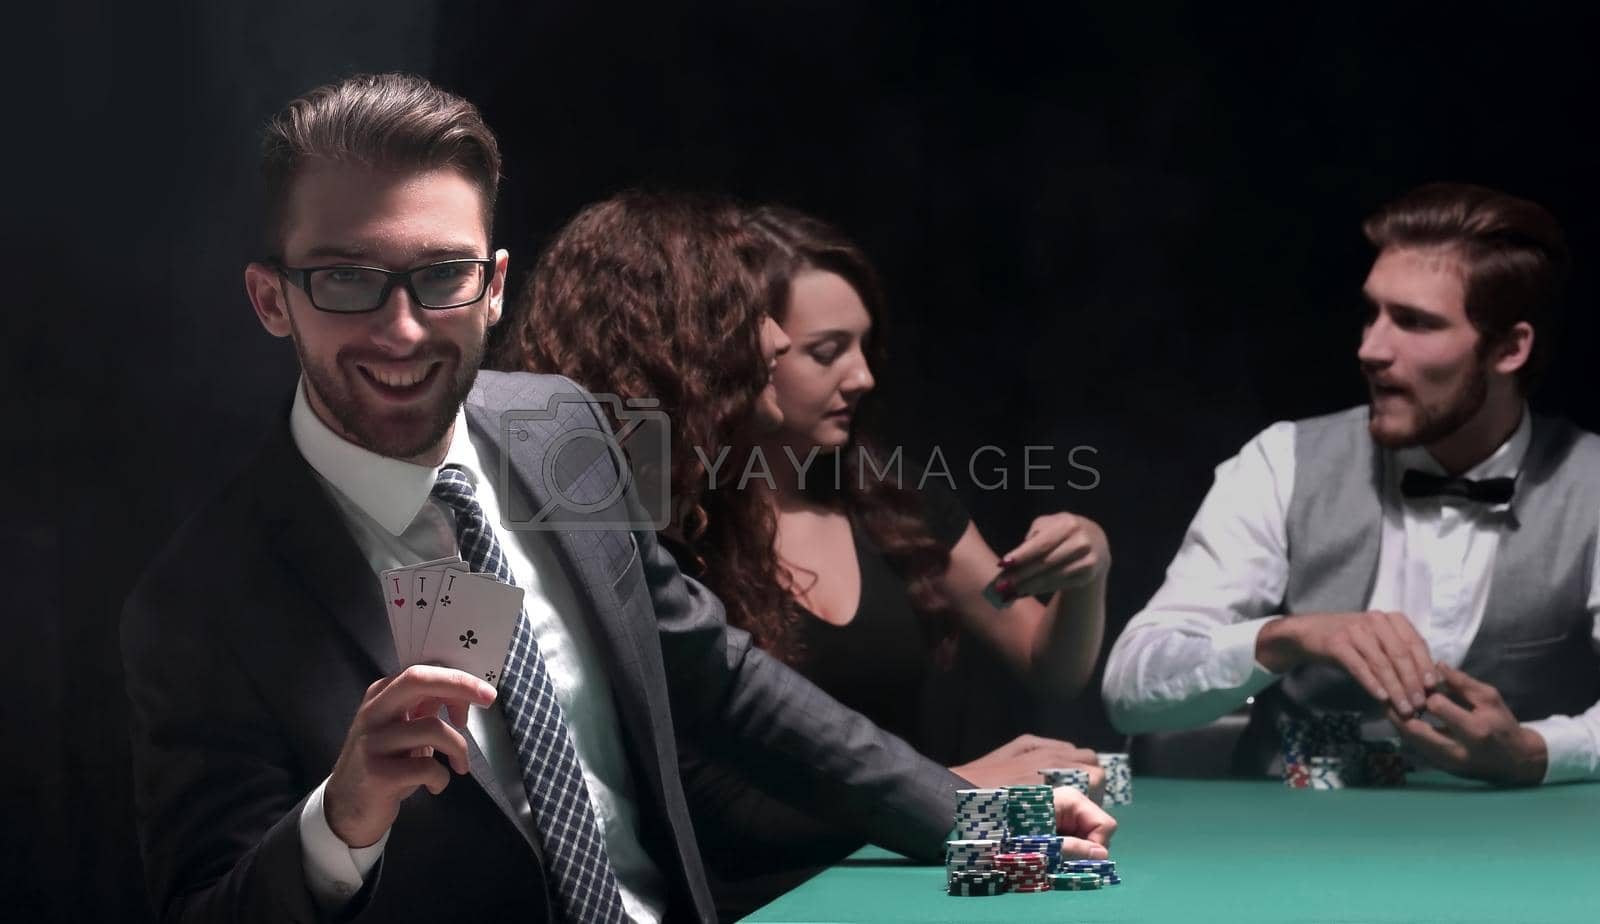 Royalty free image of background image. game of poker. by asdf